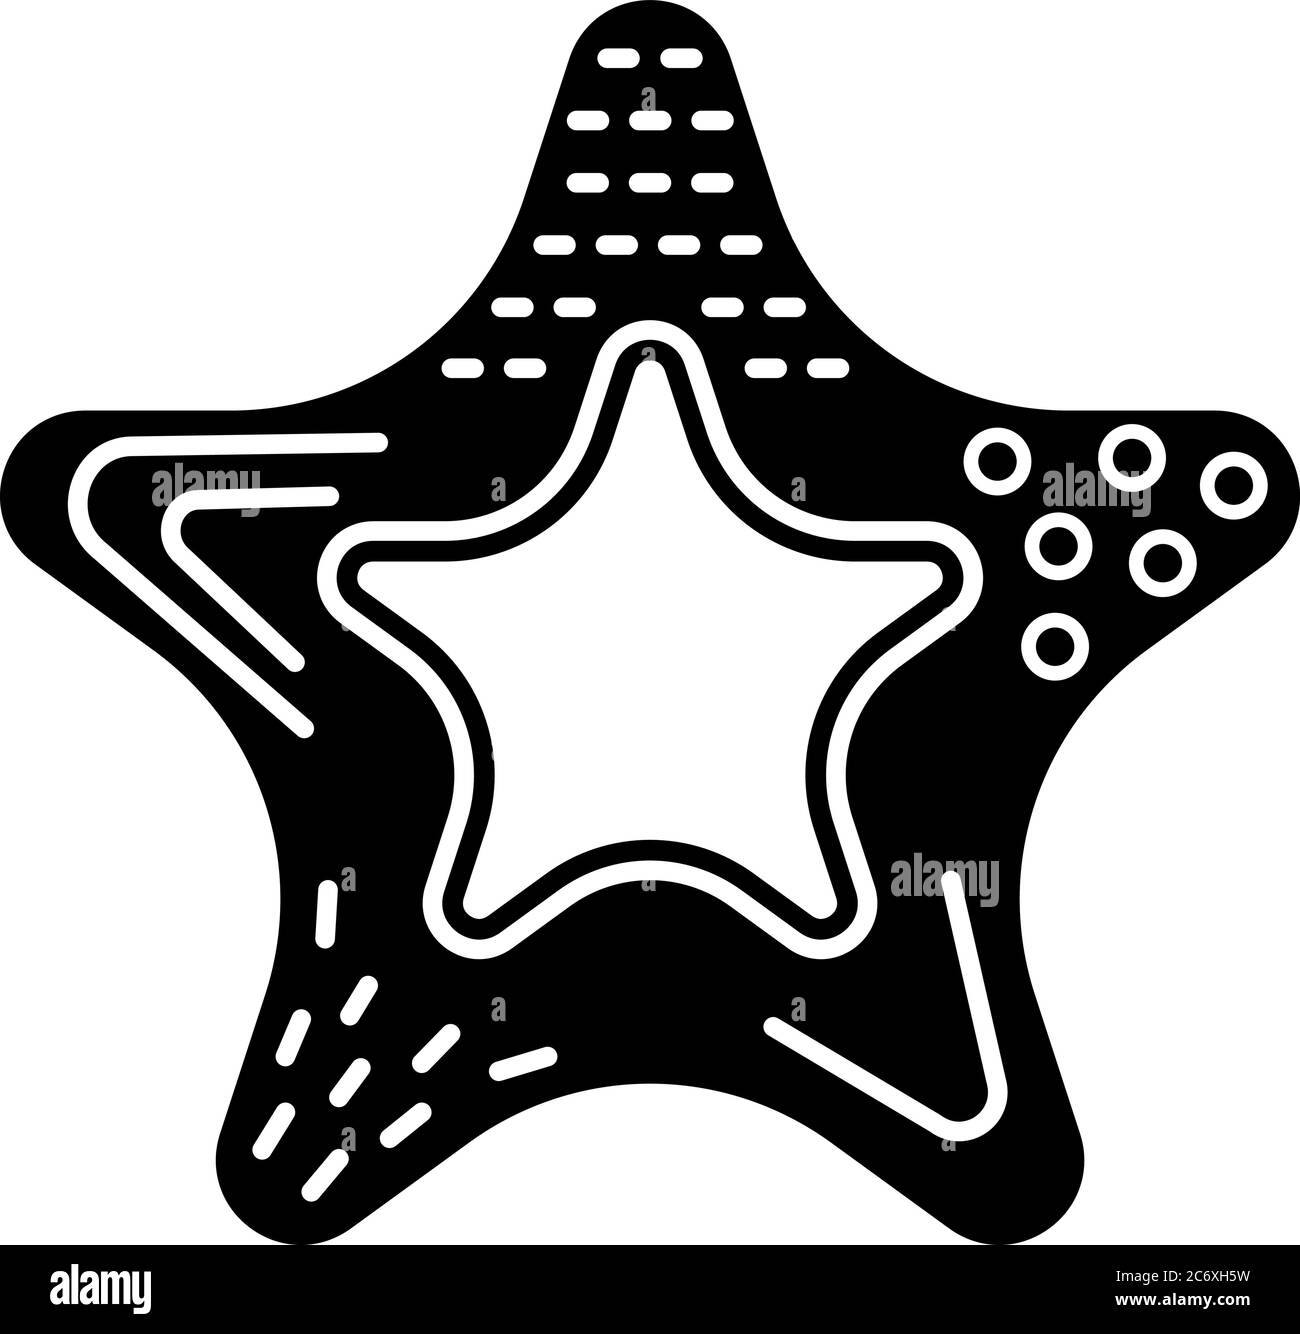 Baby teether black glyph icon. Infants safe chewing toys. Oral health. Early childhood education and childcare. Star shaped toy. Silhouette symbol on Stock Vector